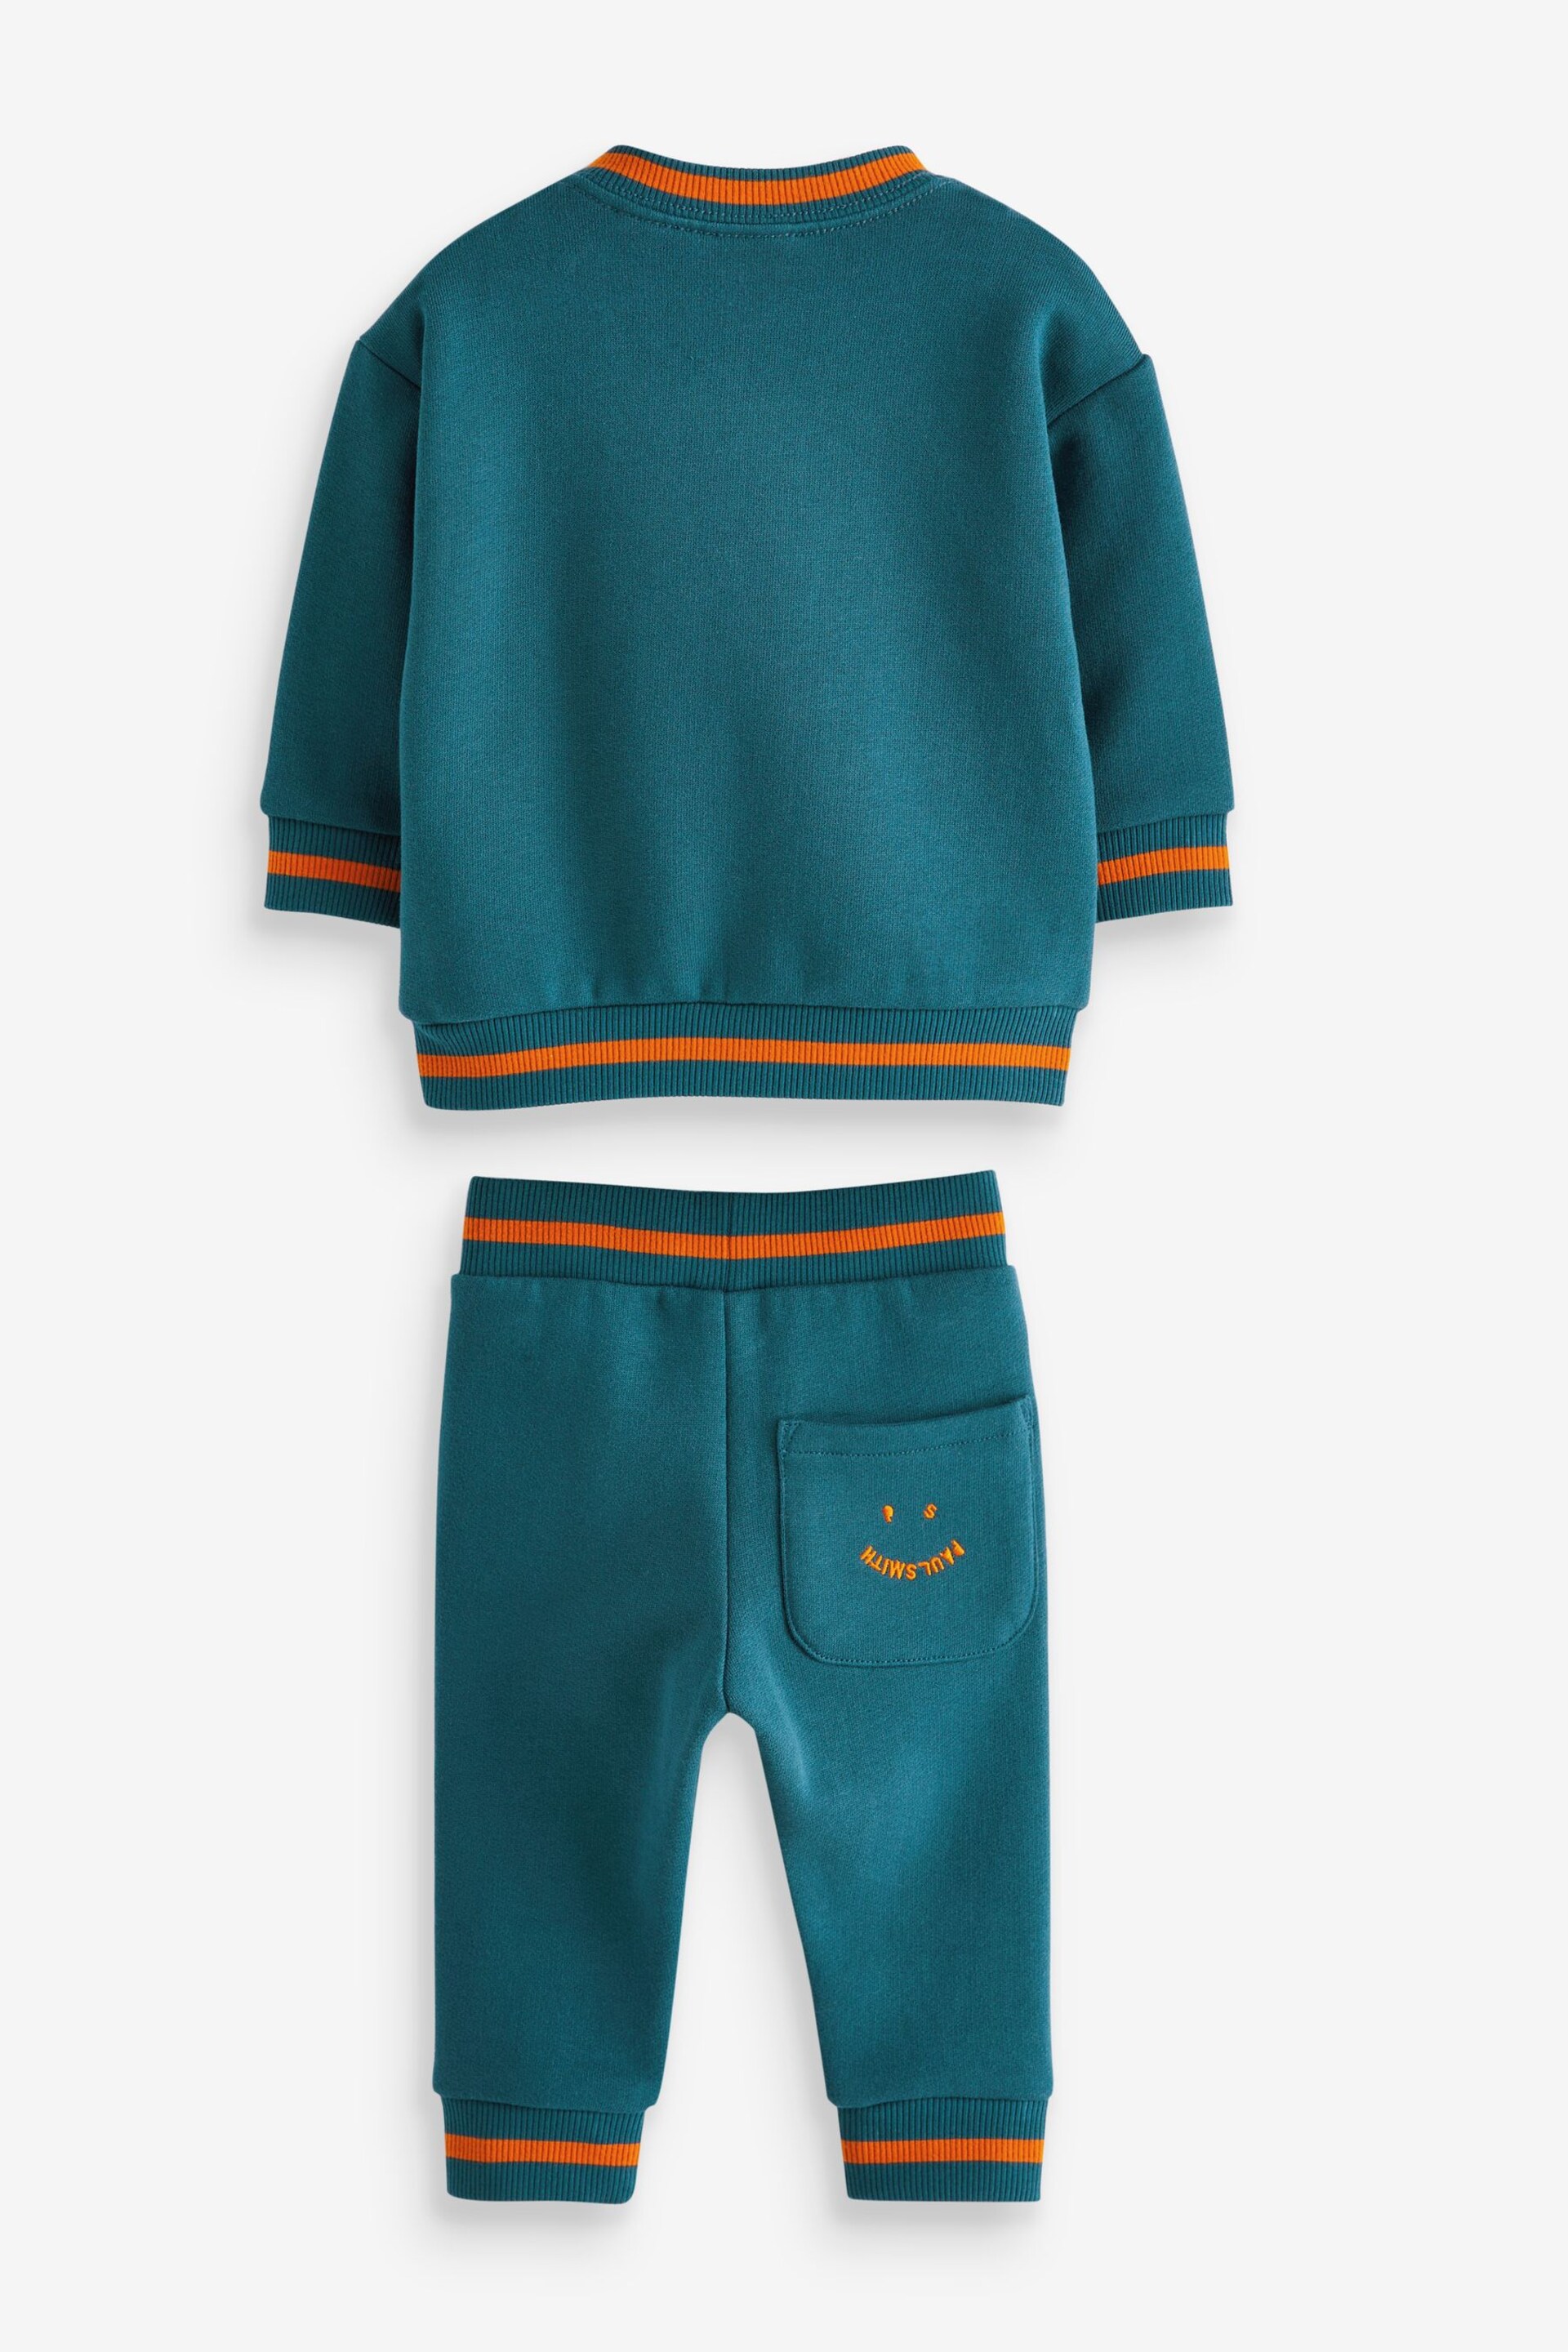 Paul Smith Baby Boys Teal  'Happy' Sweat Top and Jogger Set - Image 2 of 4